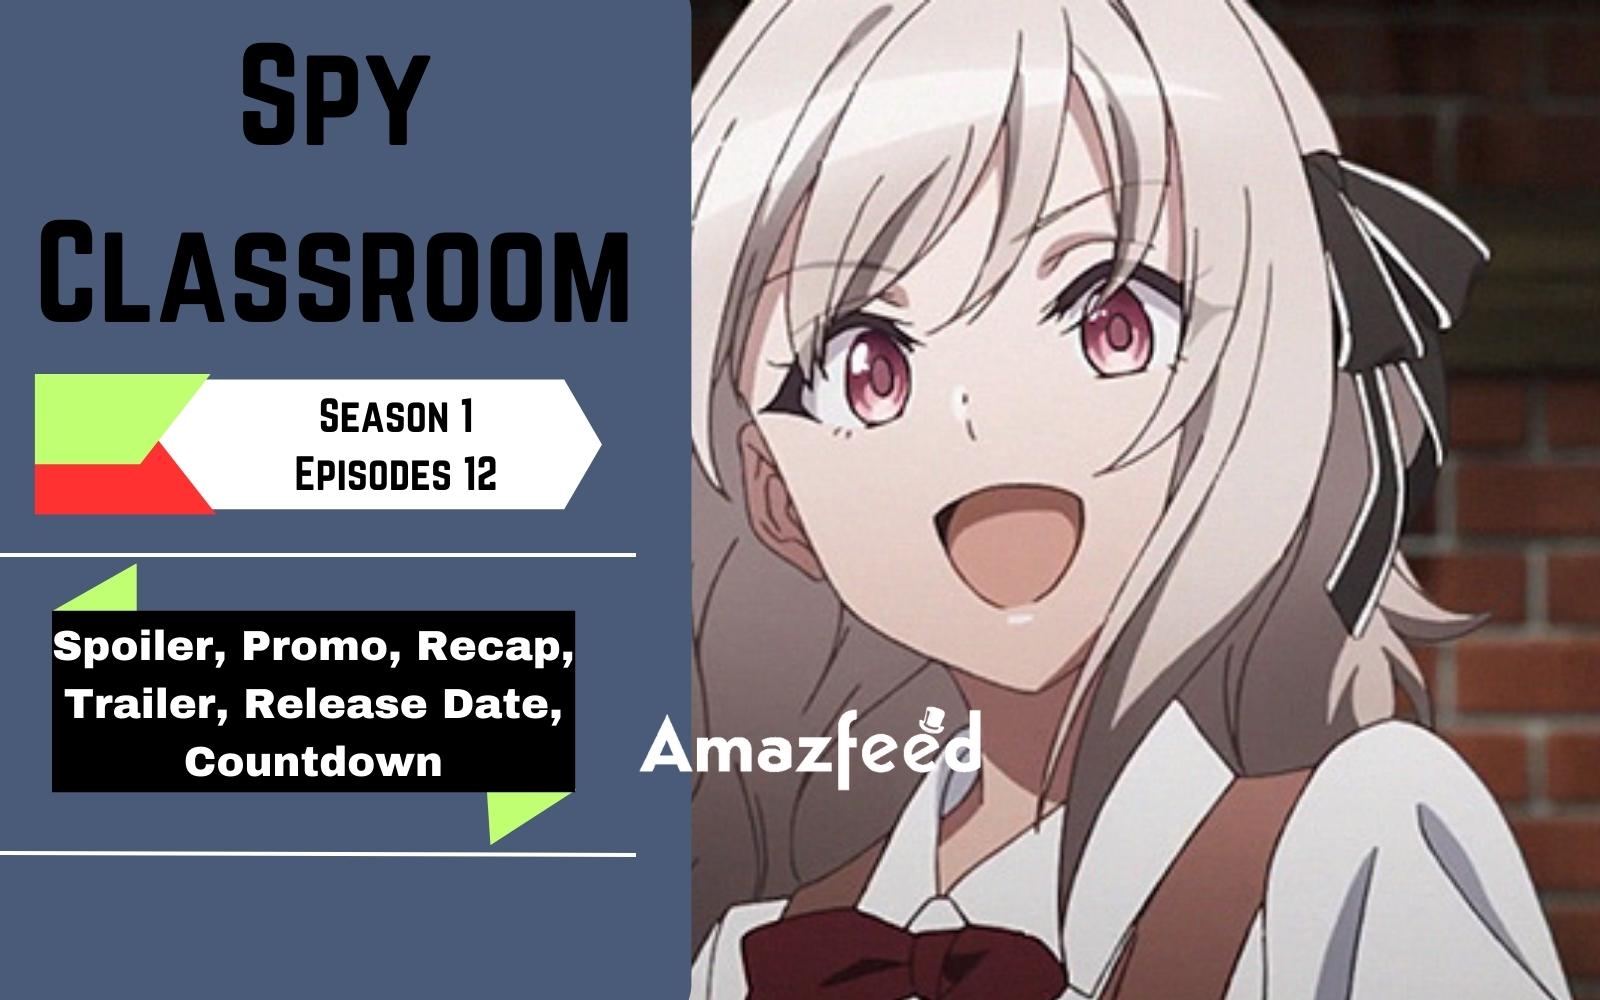 Spy Classroom season 2 renewal status and episode 12 release explained